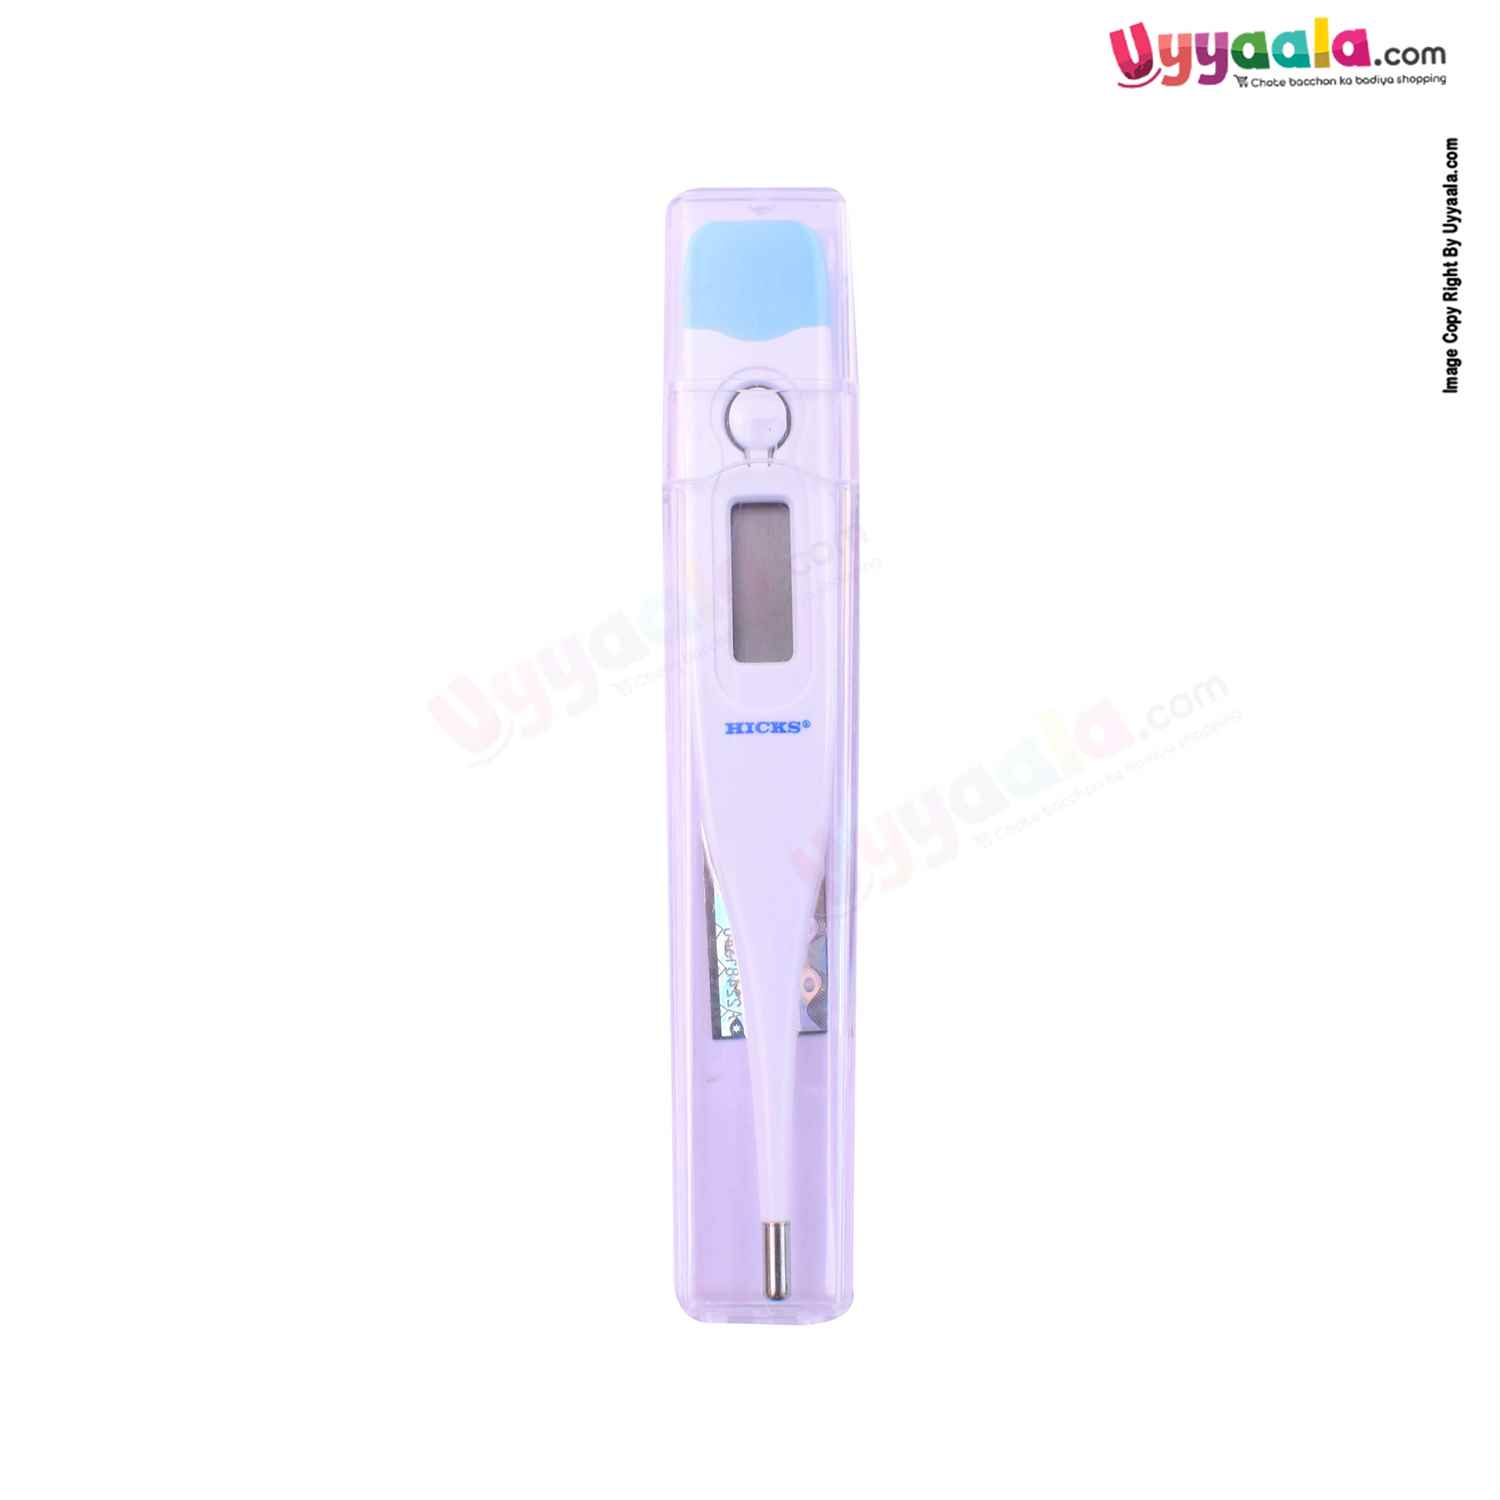 HICKS Digital Thermometer with Beeper Sound for Babies 0+m Age, White